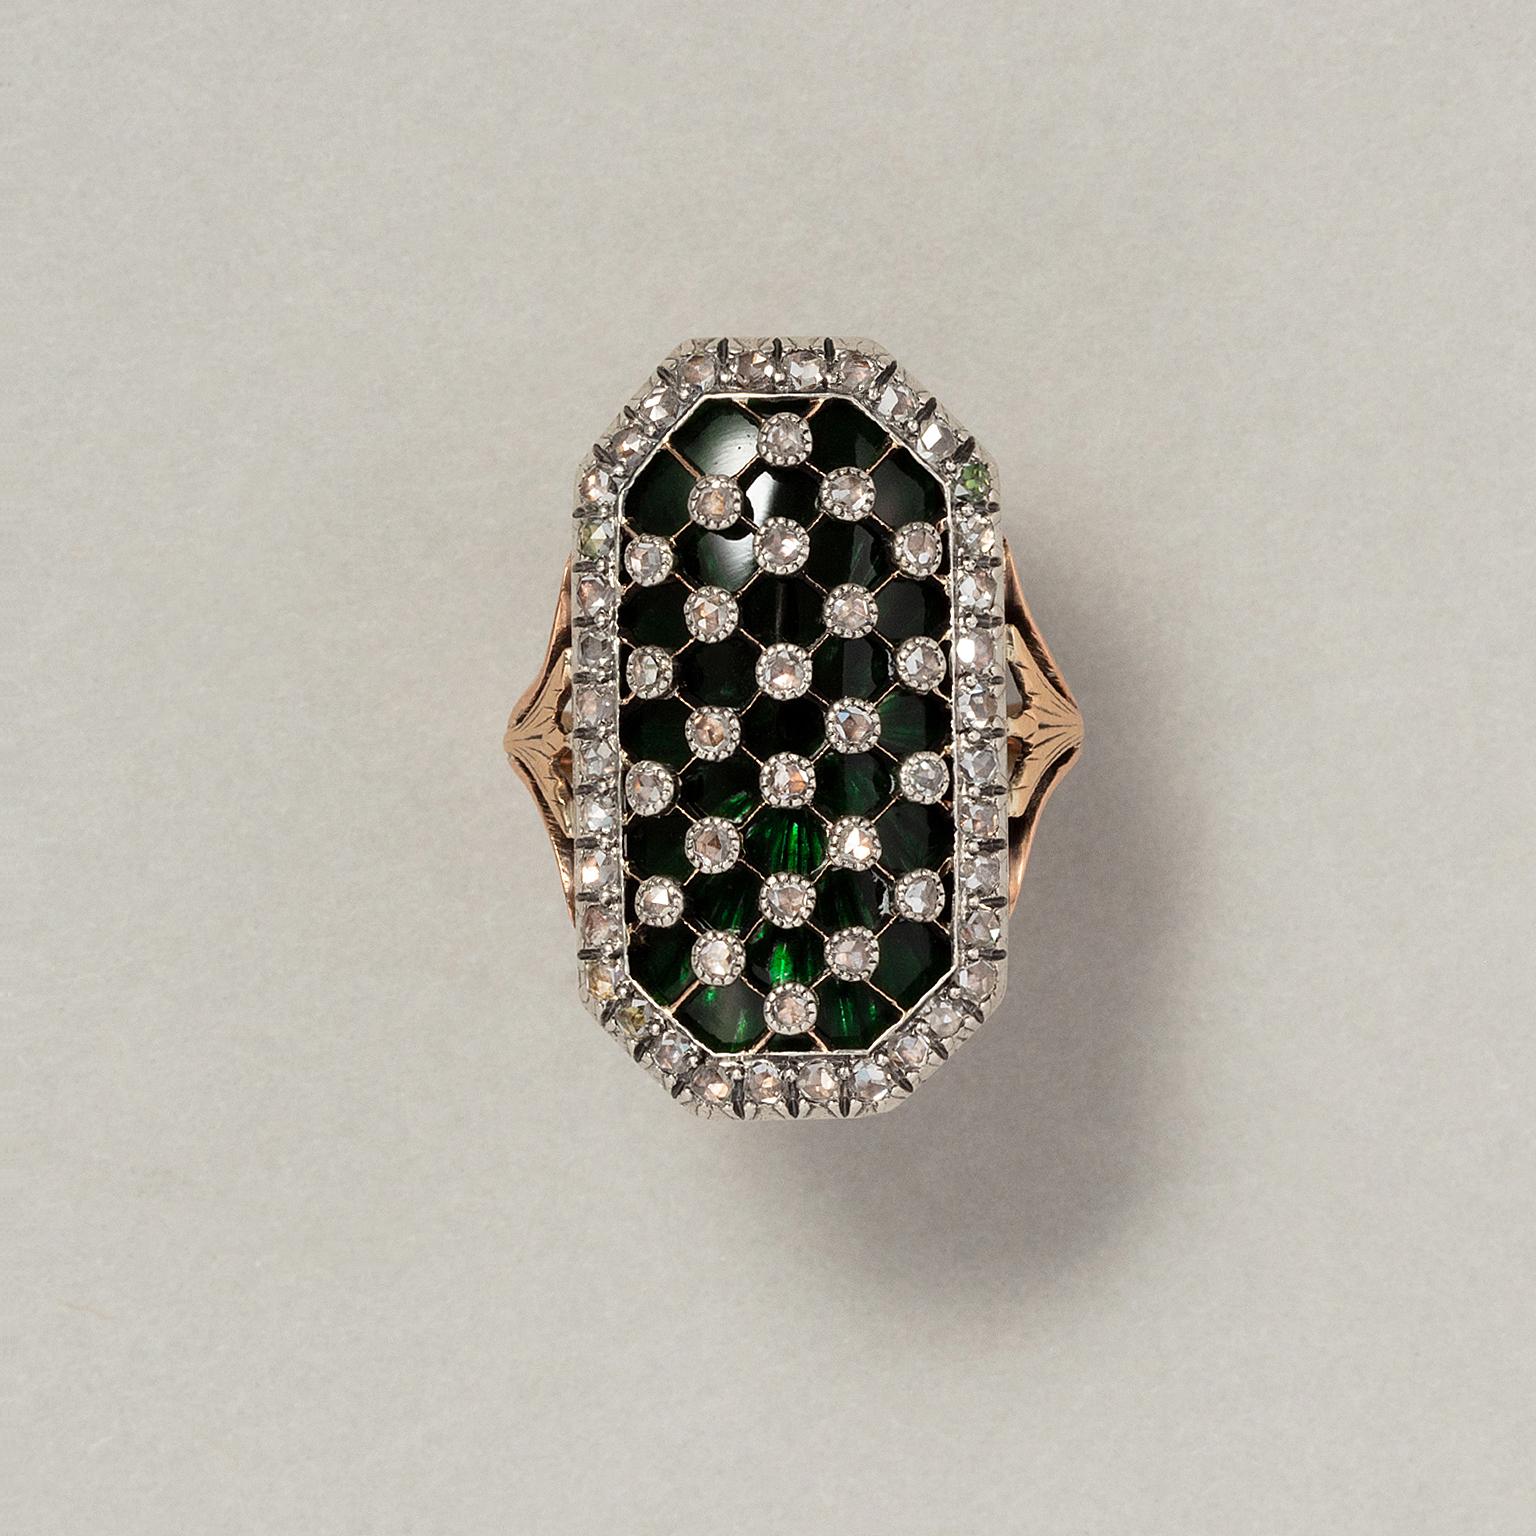 An extraordinairy 18 carat gold and silver bague au firmament with an octagonal convex element with a translucent dark green glass panel over which a silver diagonal grid set with rose cut diamonds, with a five forked hoop with lotus flowers,